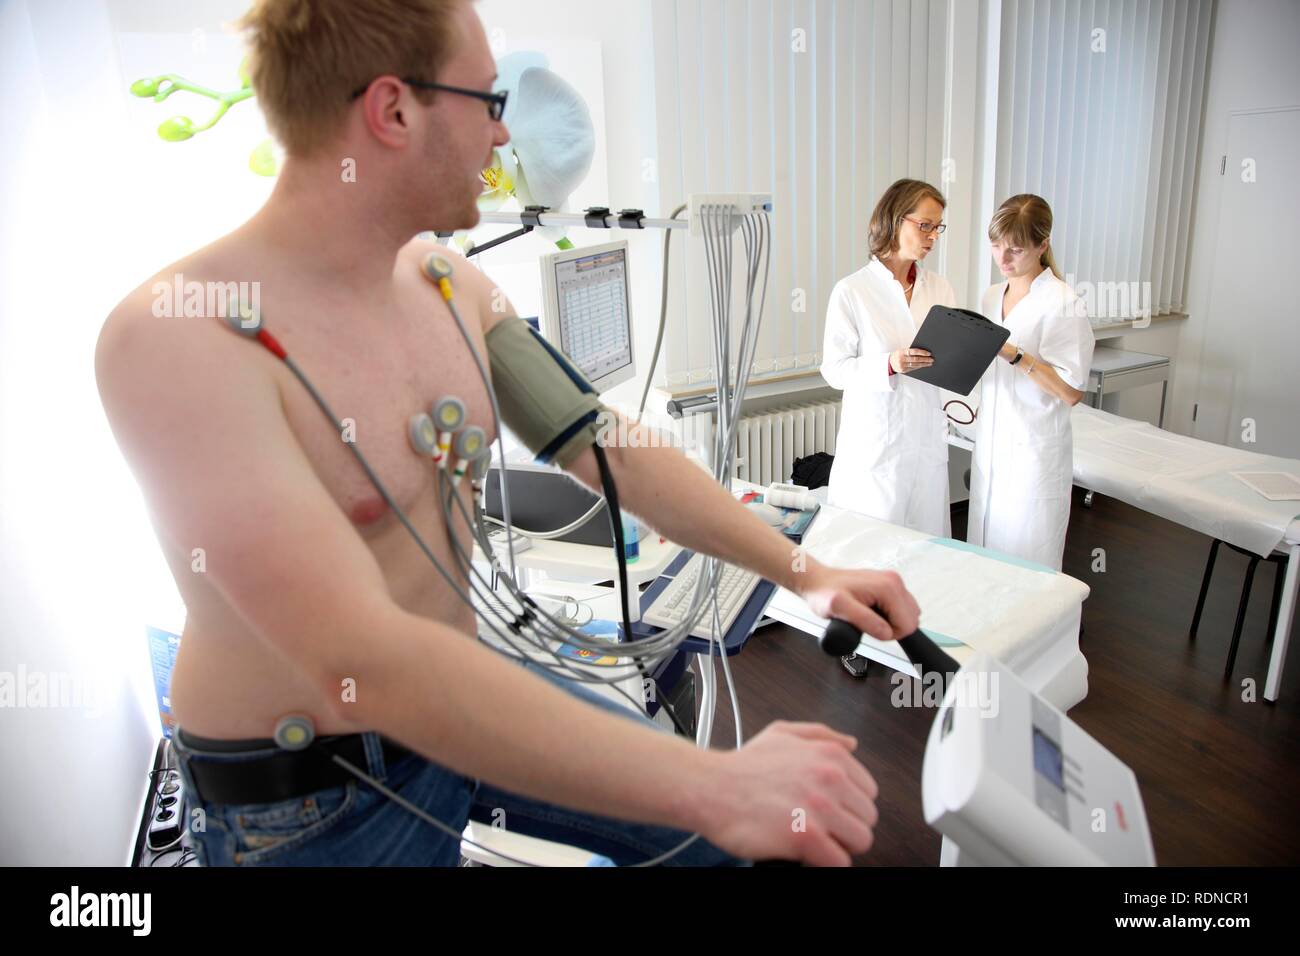 Medical practice, stress ECG, test to measure the cardiac function of a patient on a cardio machine Stock Photo